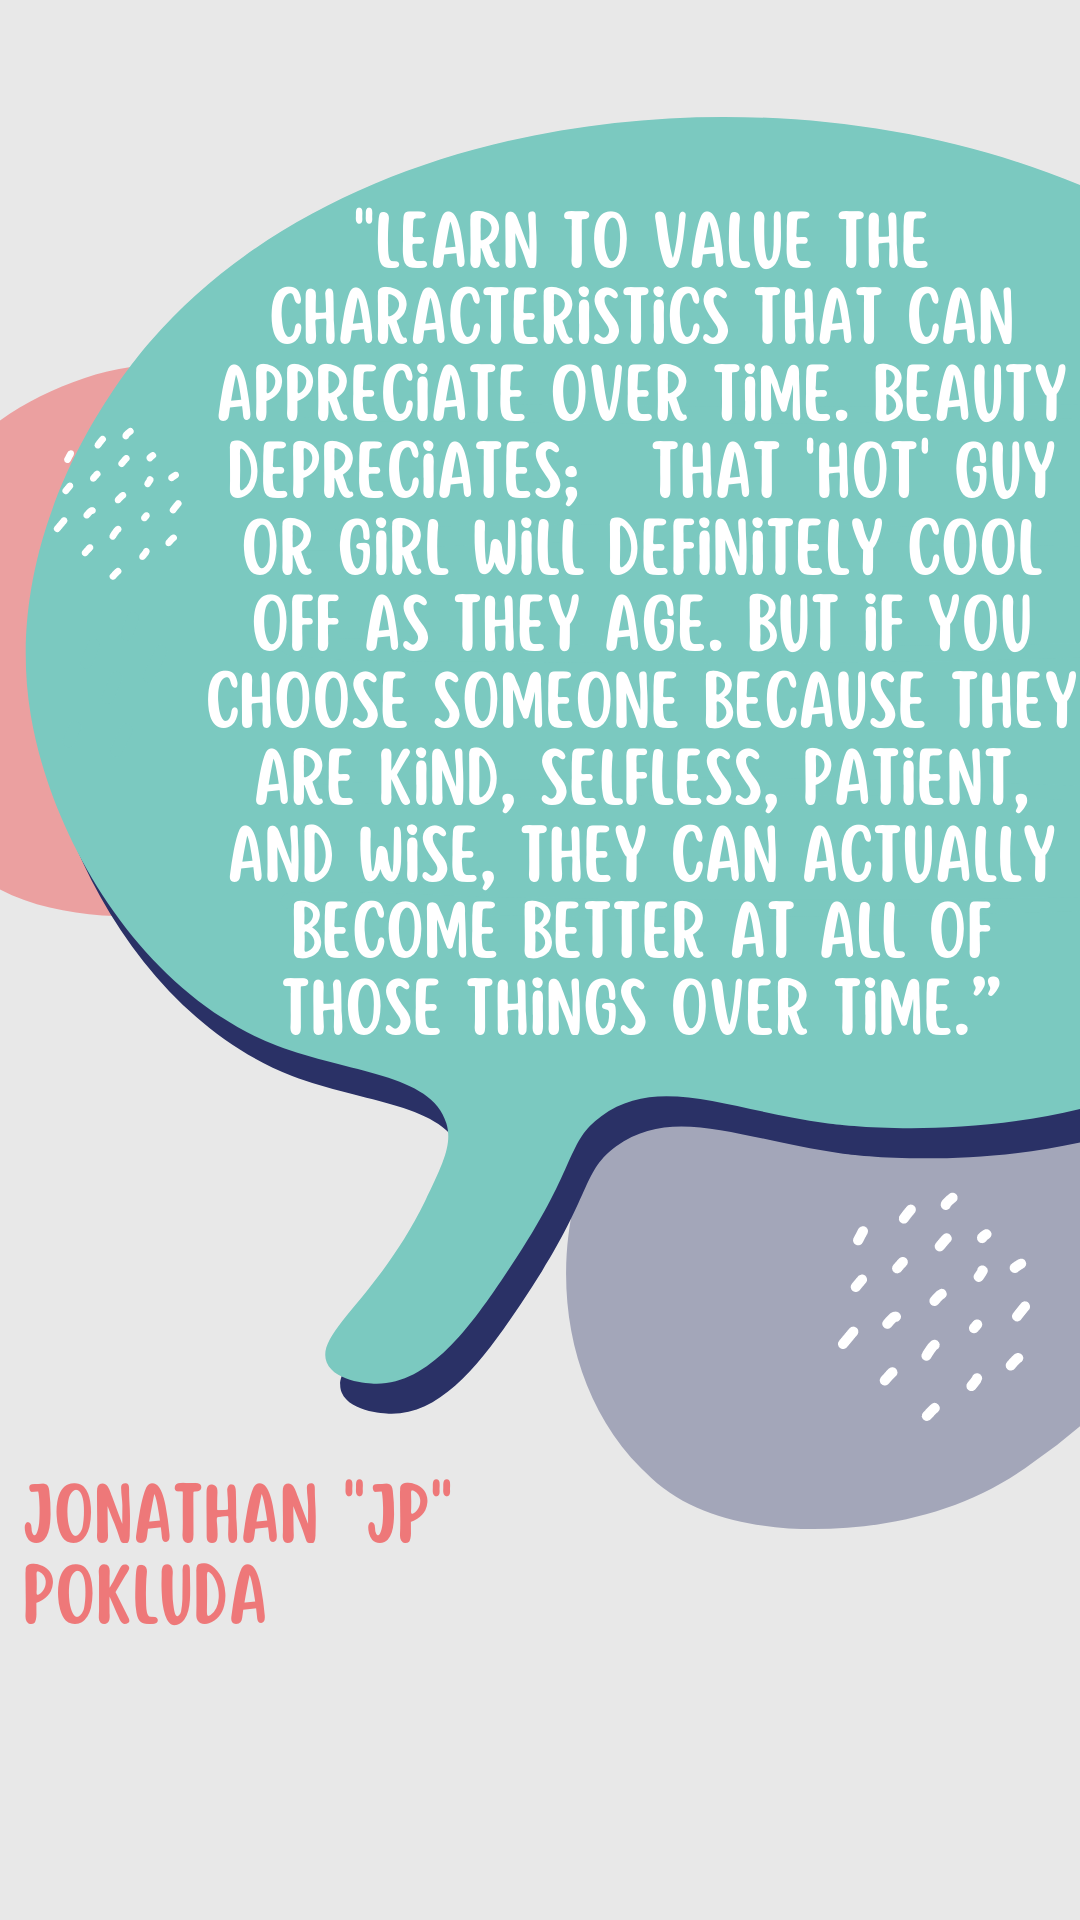 “Learn to value the characteristics that can appreciate over time. Beauty depreciates; that “hot” guy or girl will definitely cool off as they age. But if you choose someone because they are kind, selfless, patient, and wise, they can actually become better at all of those things over time,” said JP Pokluda. 